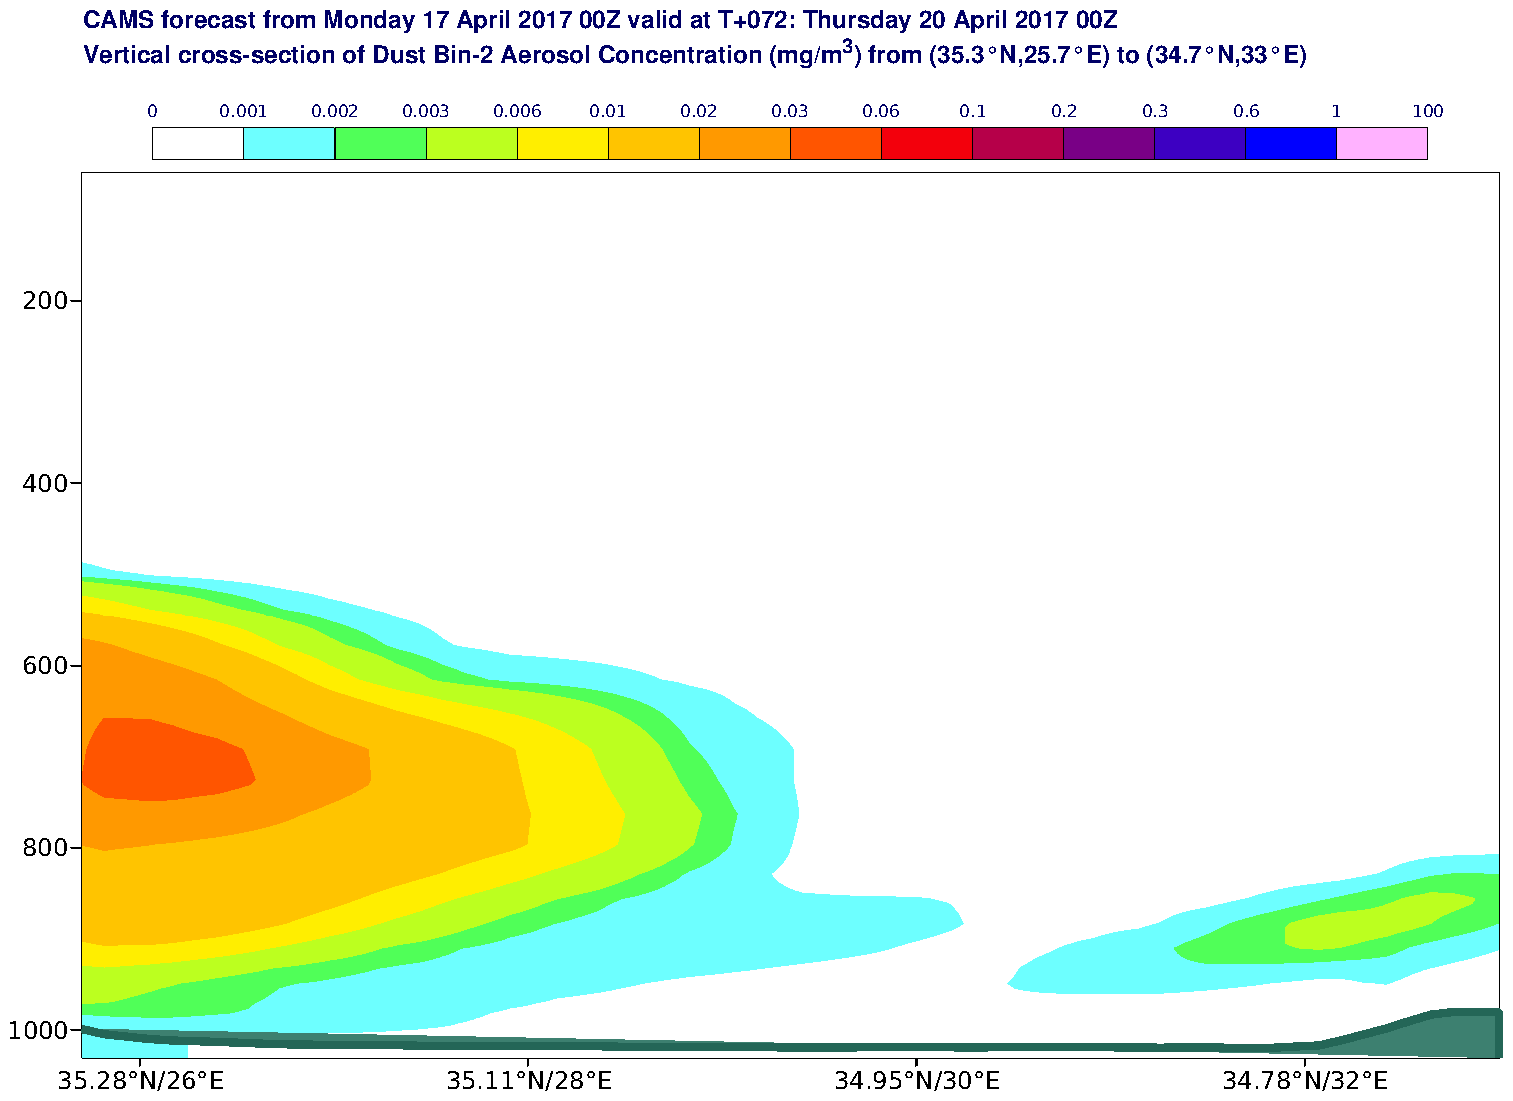 Vertical cross-section of Dust Bin-2 Aerosol Concentration (mg/m3) valid at T72 - 2017-04-20 00:00